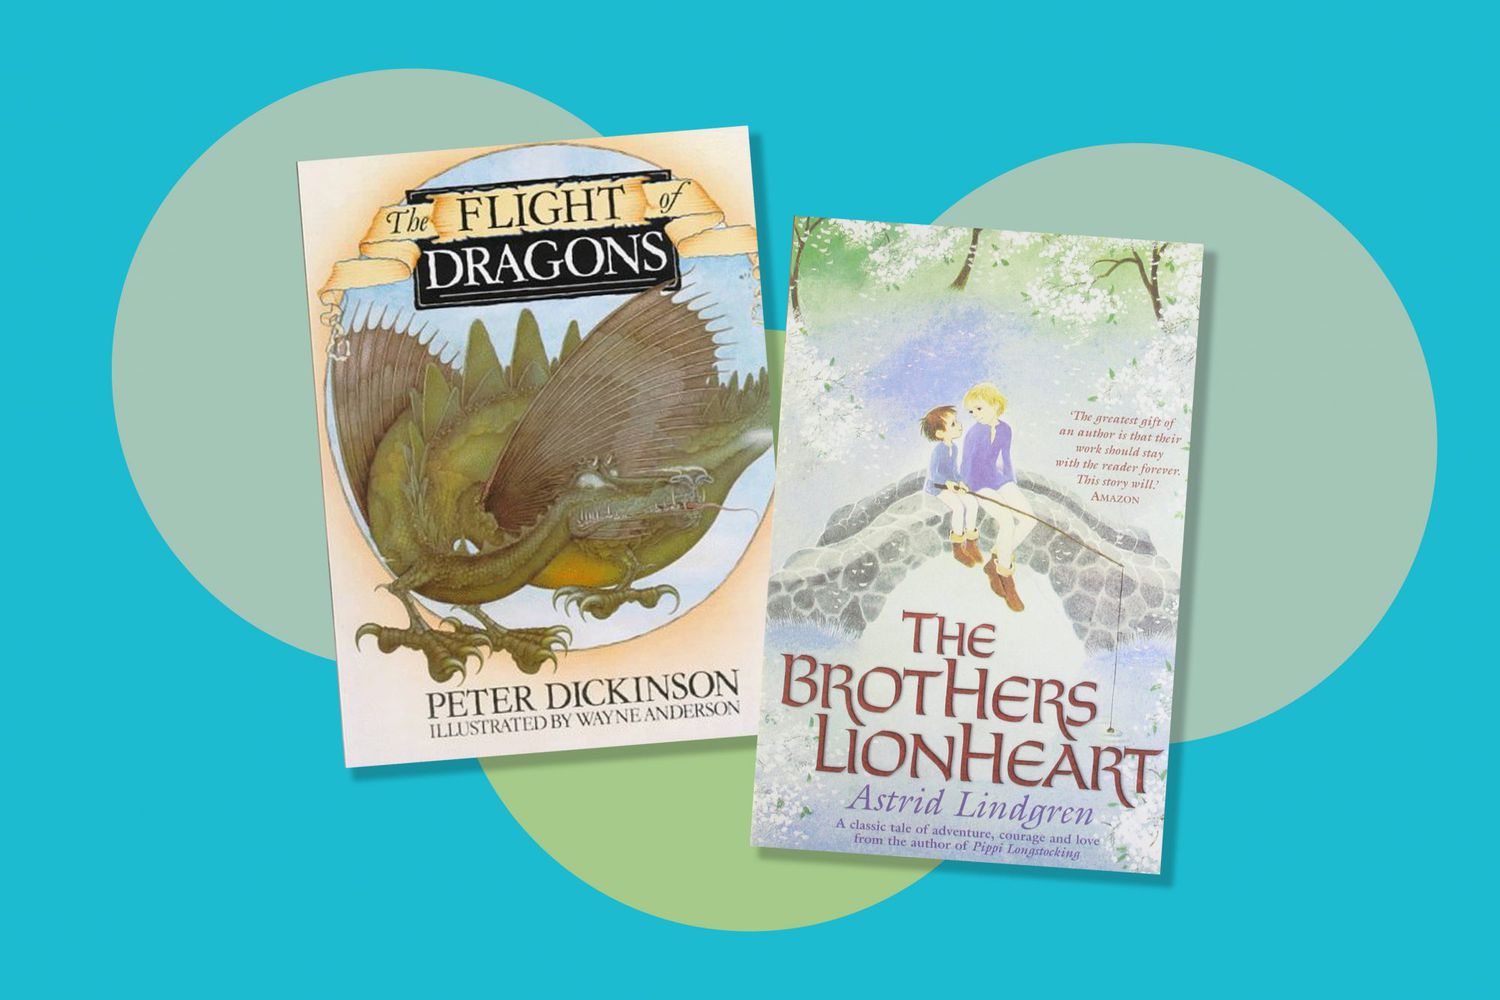 The Flight of Dragons Book Cover and The Brothers Lionheart Book Cover